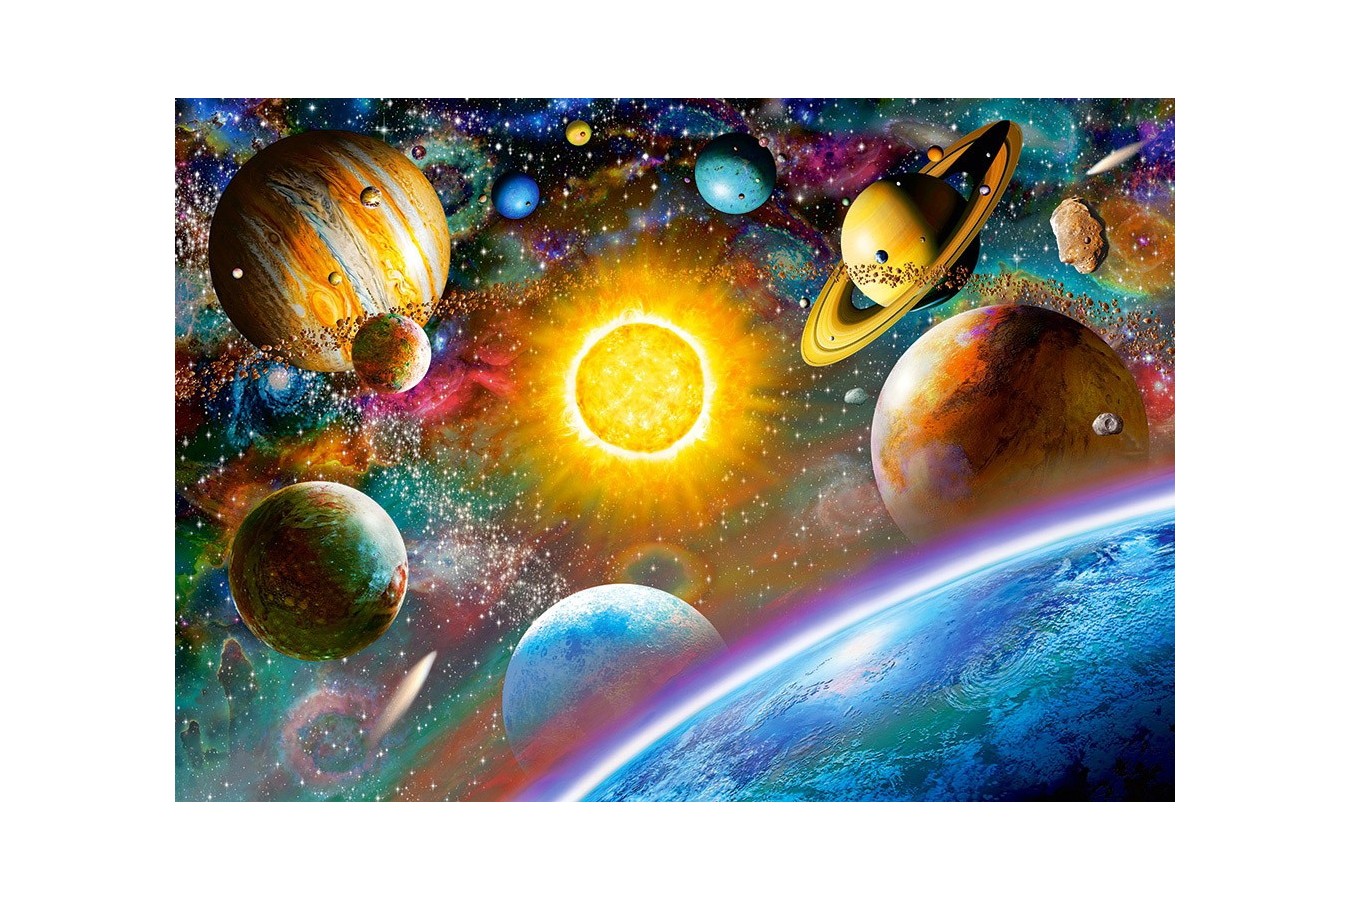 Puzzle Castorland - Outer Space, 500 piese